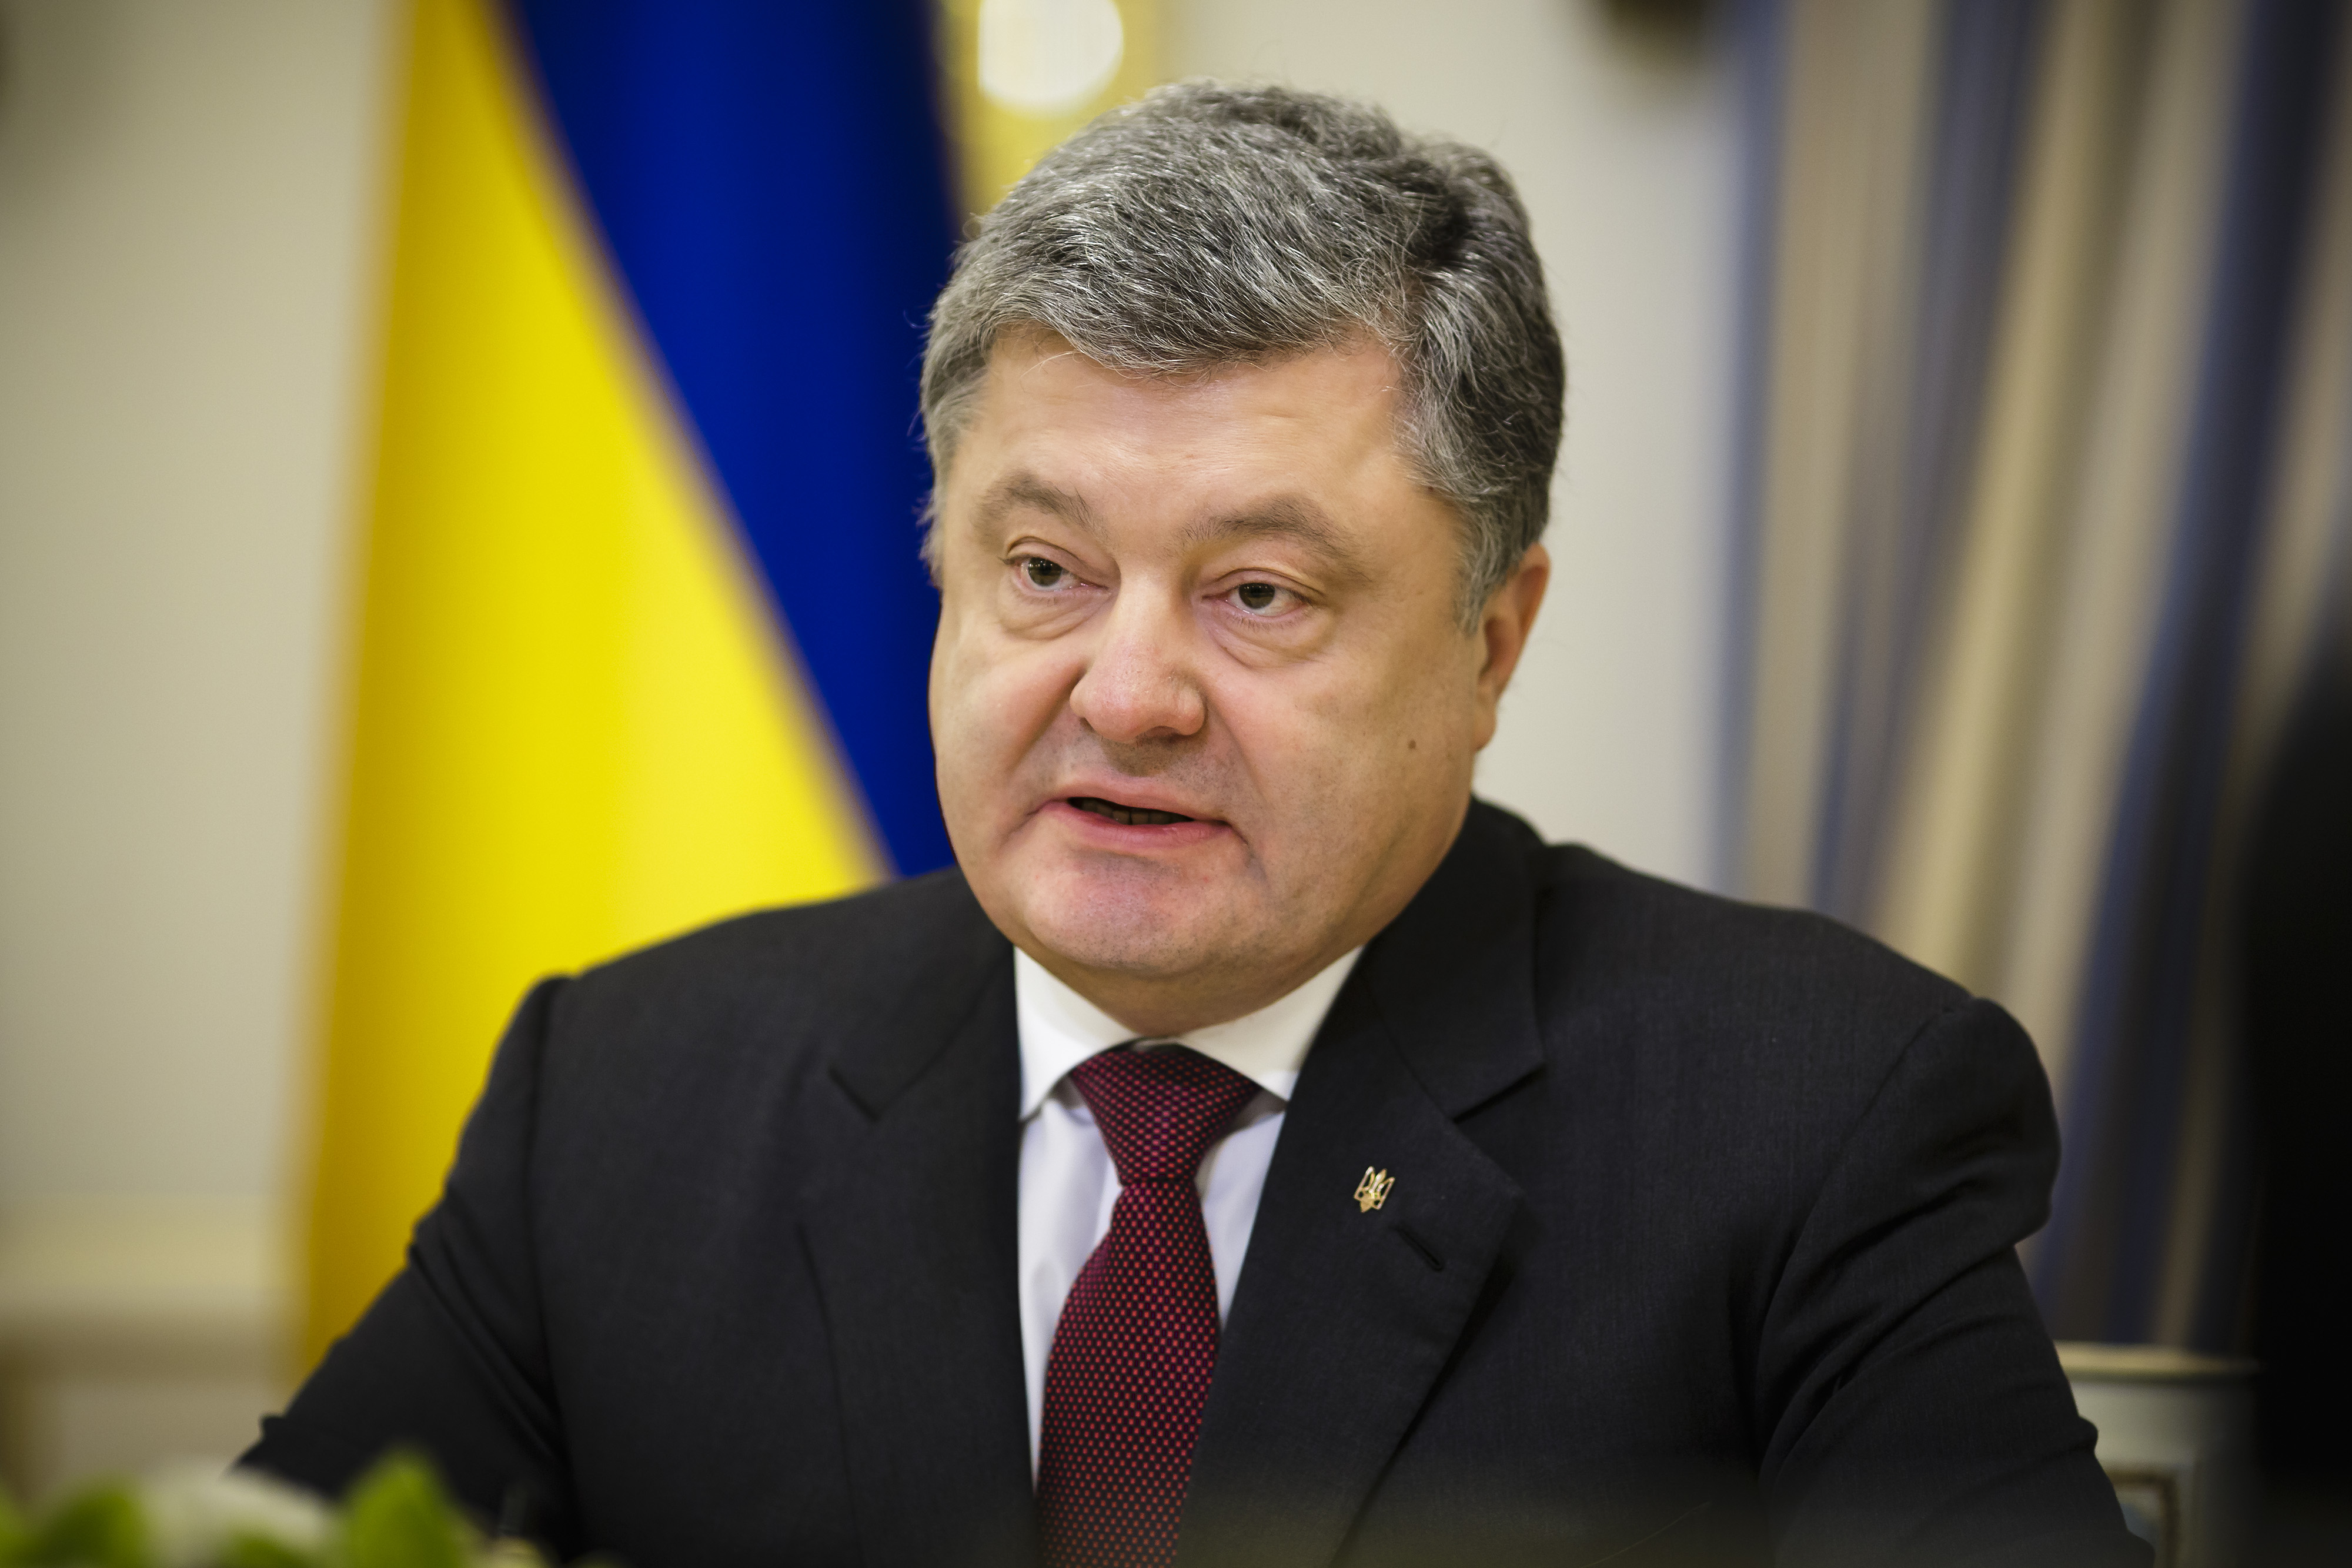 President of Ukraine Petro Poroschenko on March 02, 2017 in Kiev, Ukraine. Gabriel is on a two-day trip to conduct talks with government representatives. (Thomas Trutschel—Photothek via Getty Images)